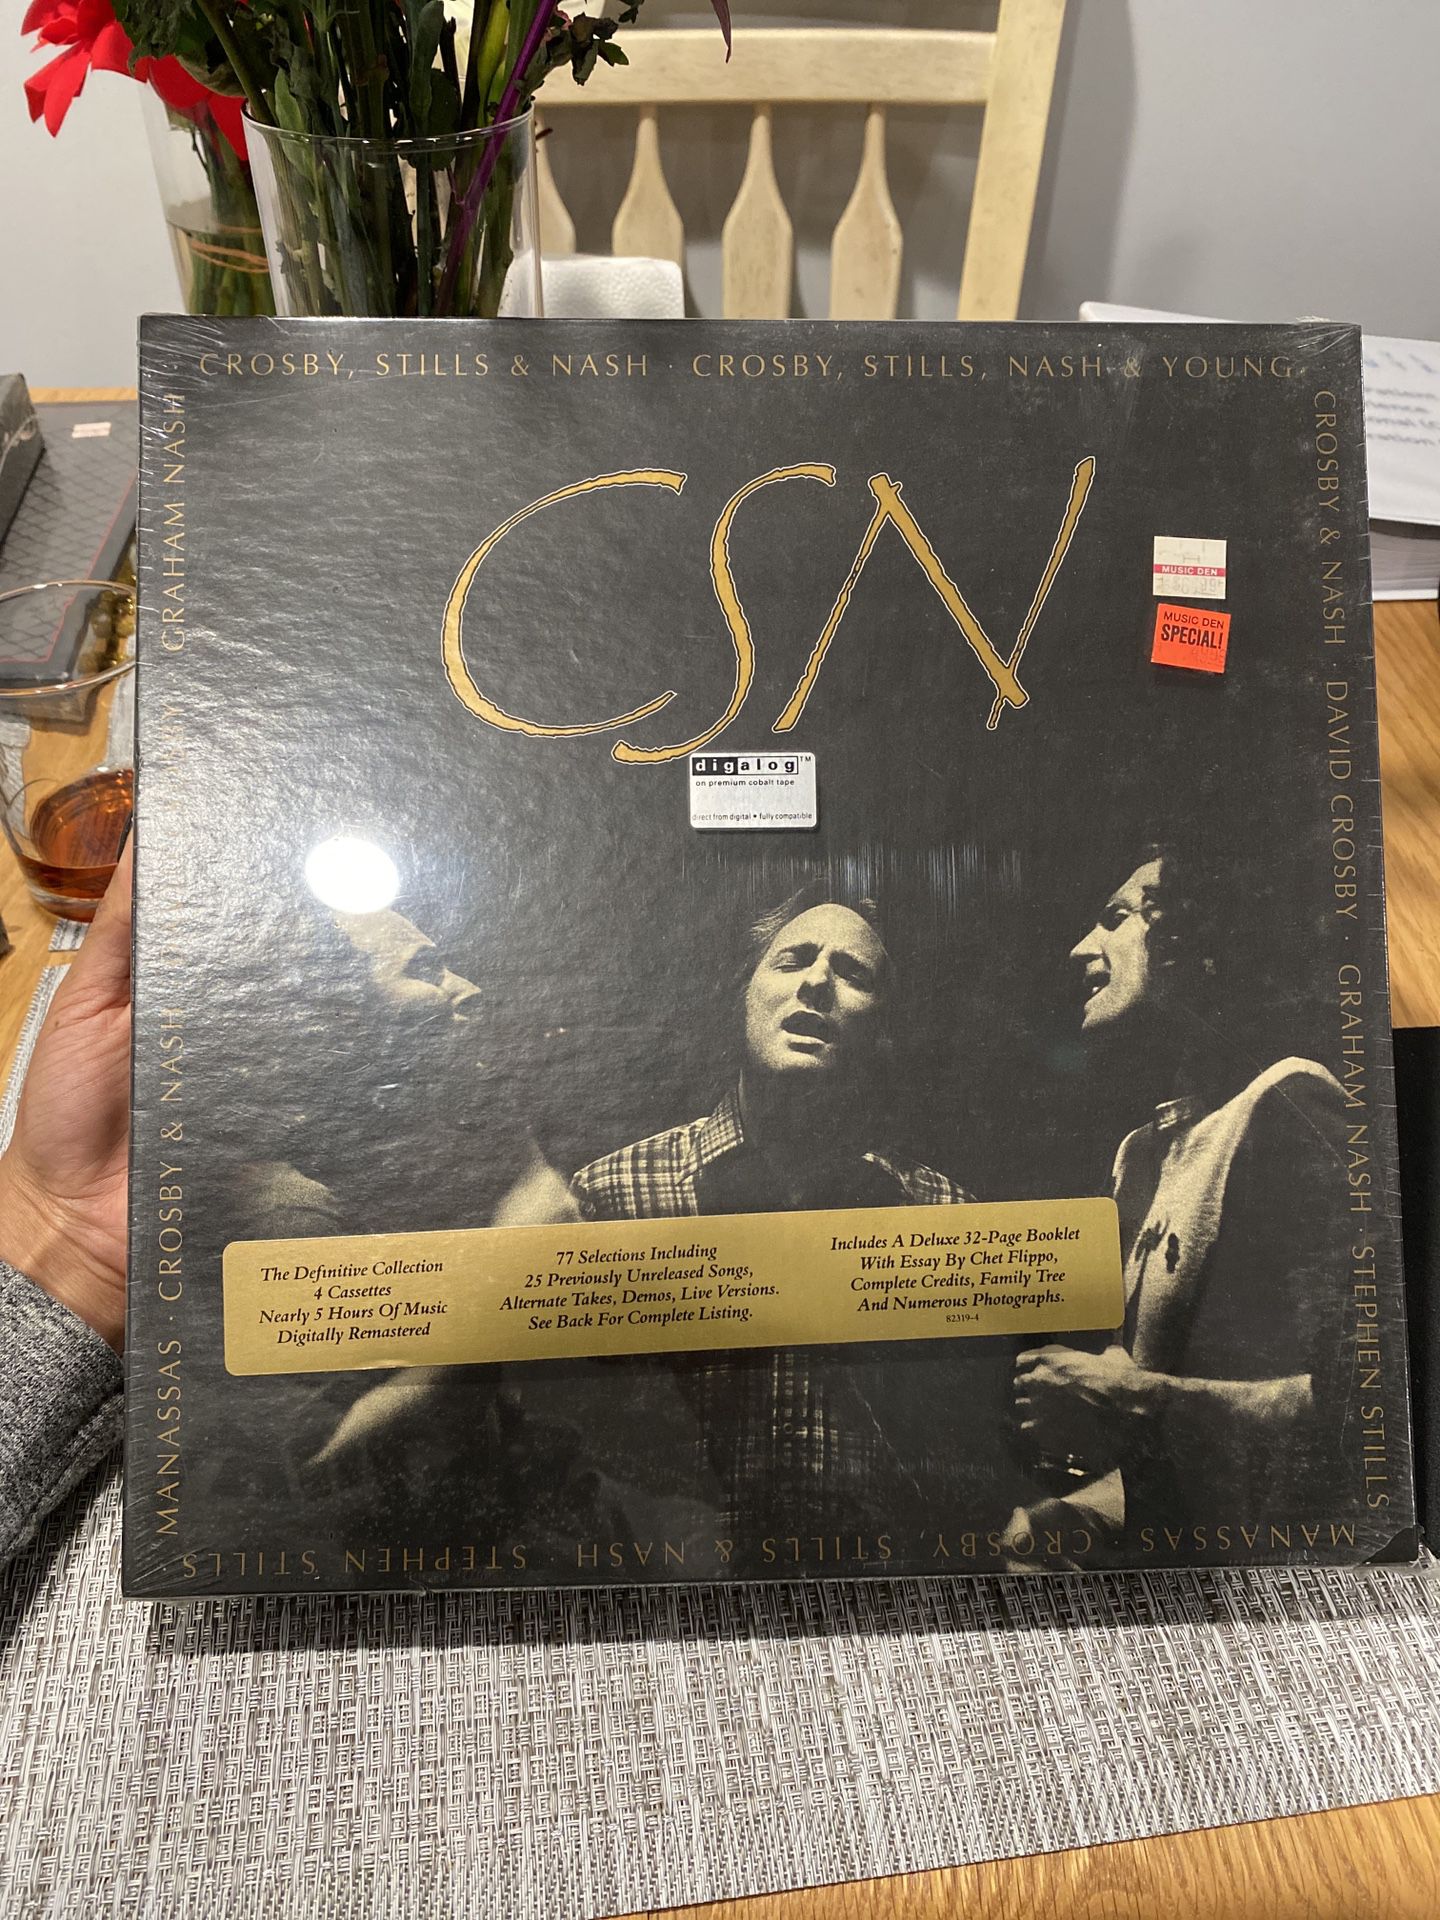 CSN [Box Set] [Box] by Crosby, Stills & Nash (Cassette, Oct-1991, 4 Discs,.... Condition is "Brand New". Shipped with USPS Media Mail.